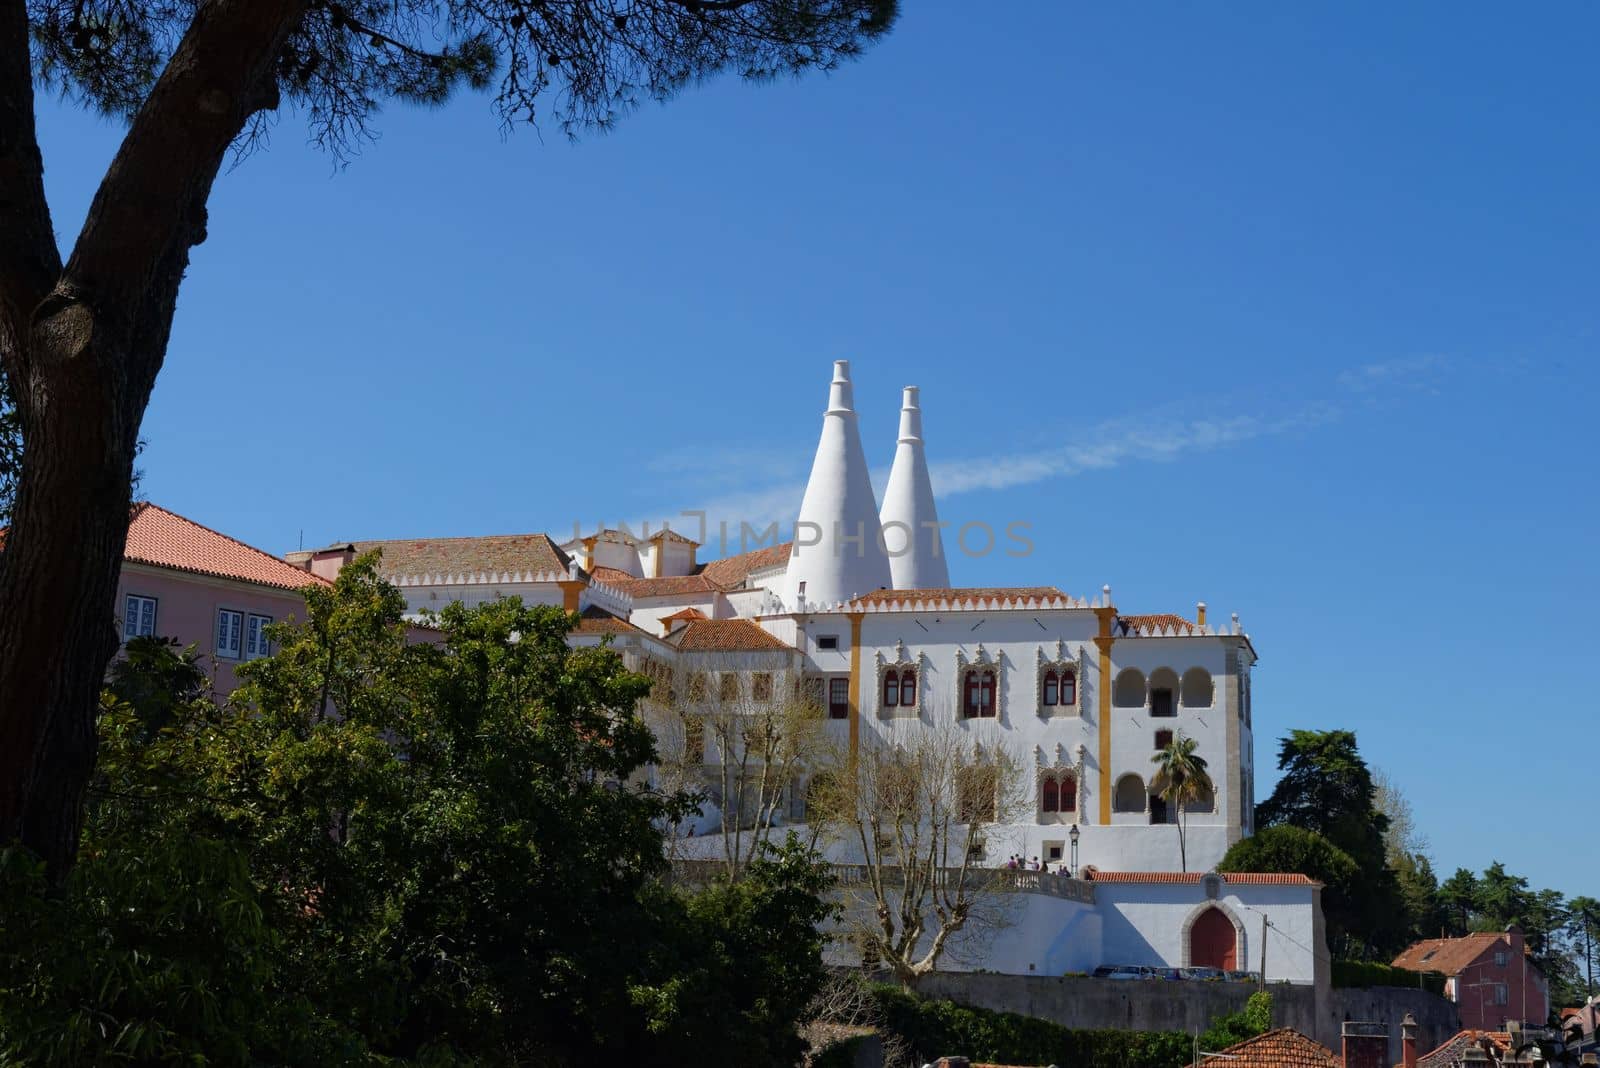 National Palace of Sintra, Portugal by slavapolo